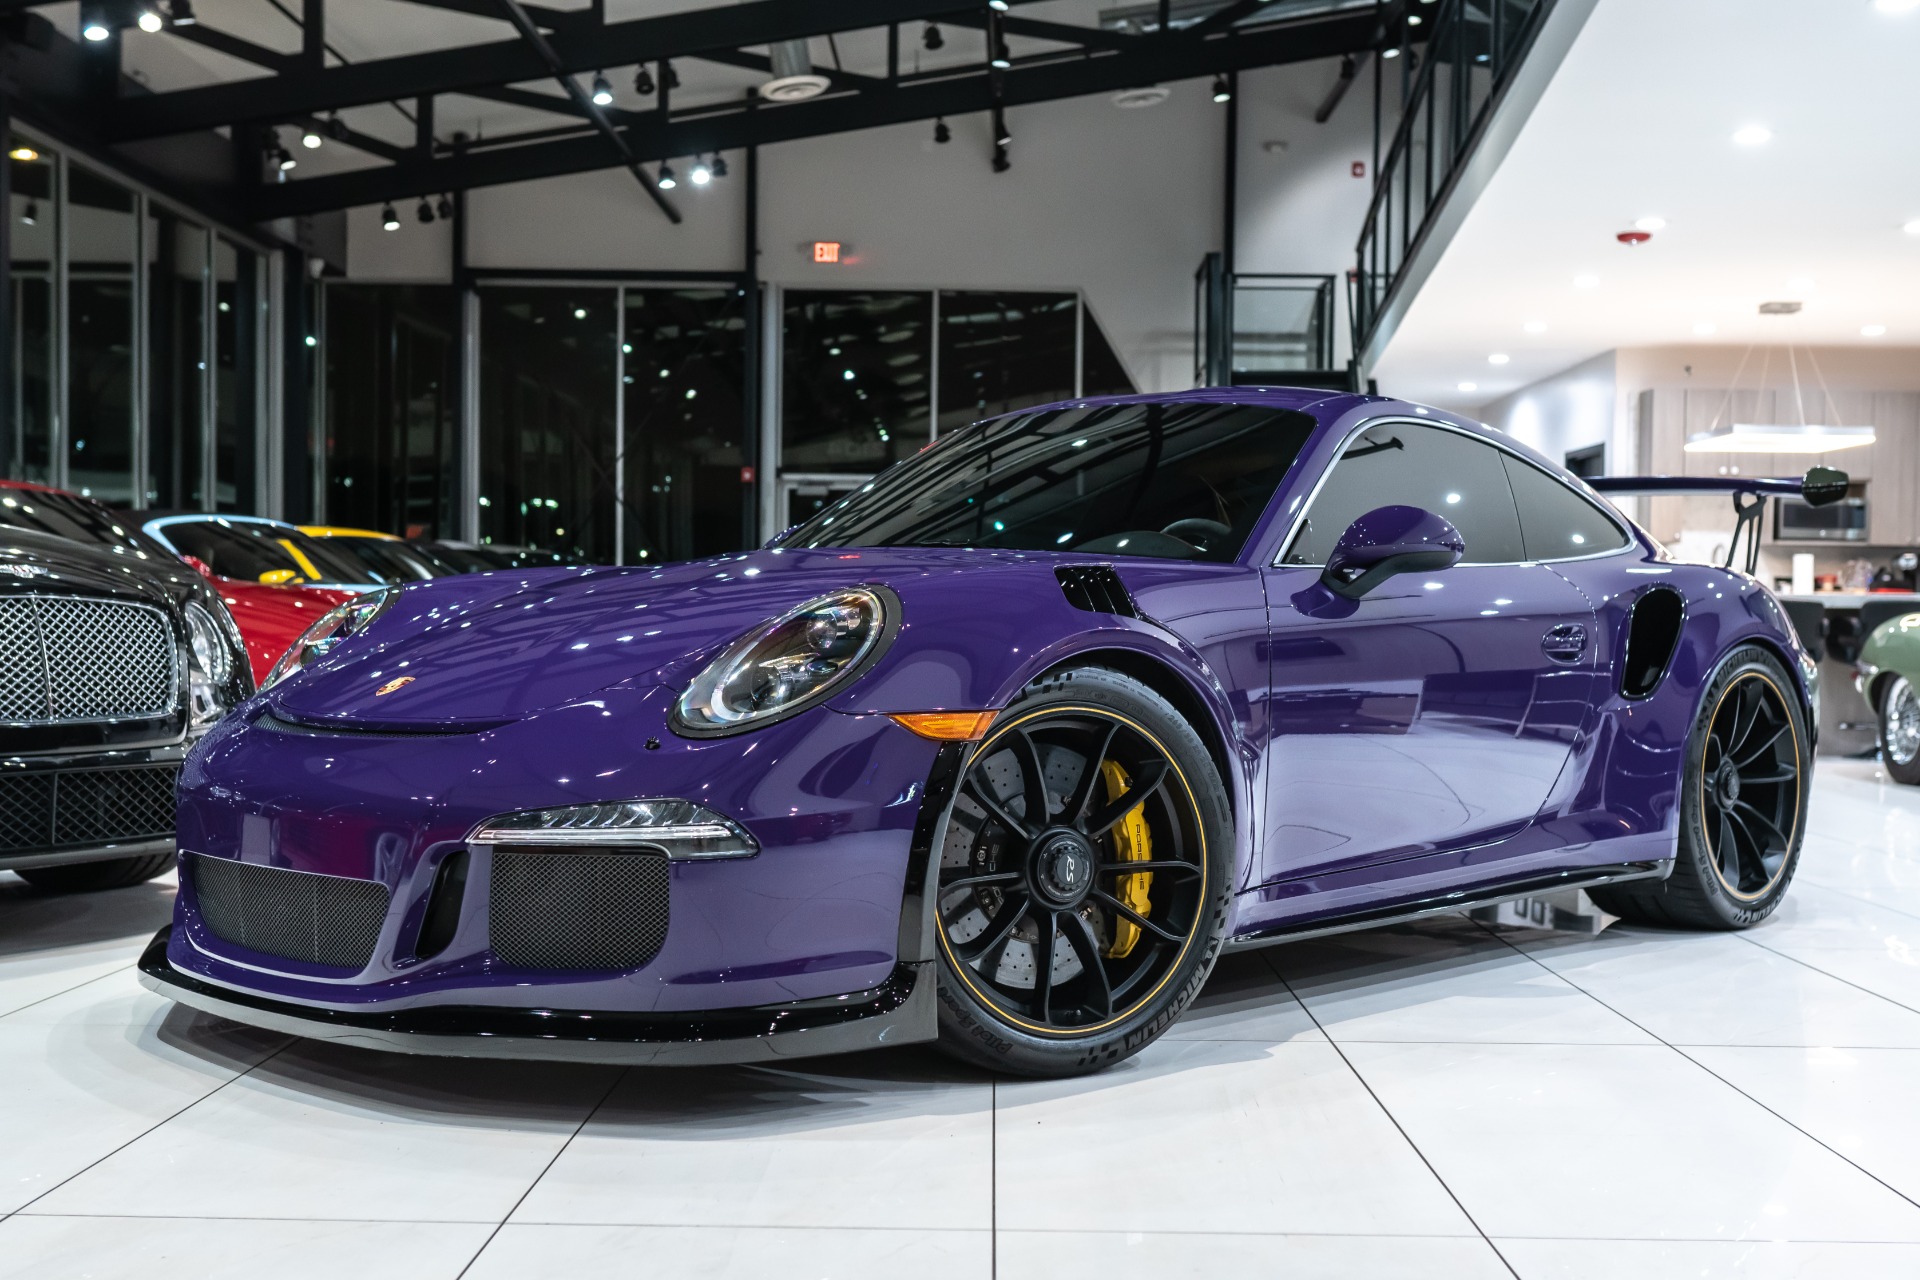 Used-2016-Porsche-911-GT3-RS-Coupe-Ultraviolet-LOW-Miles-PCCB-Shark-Werks-Exhaust-Front-PPF